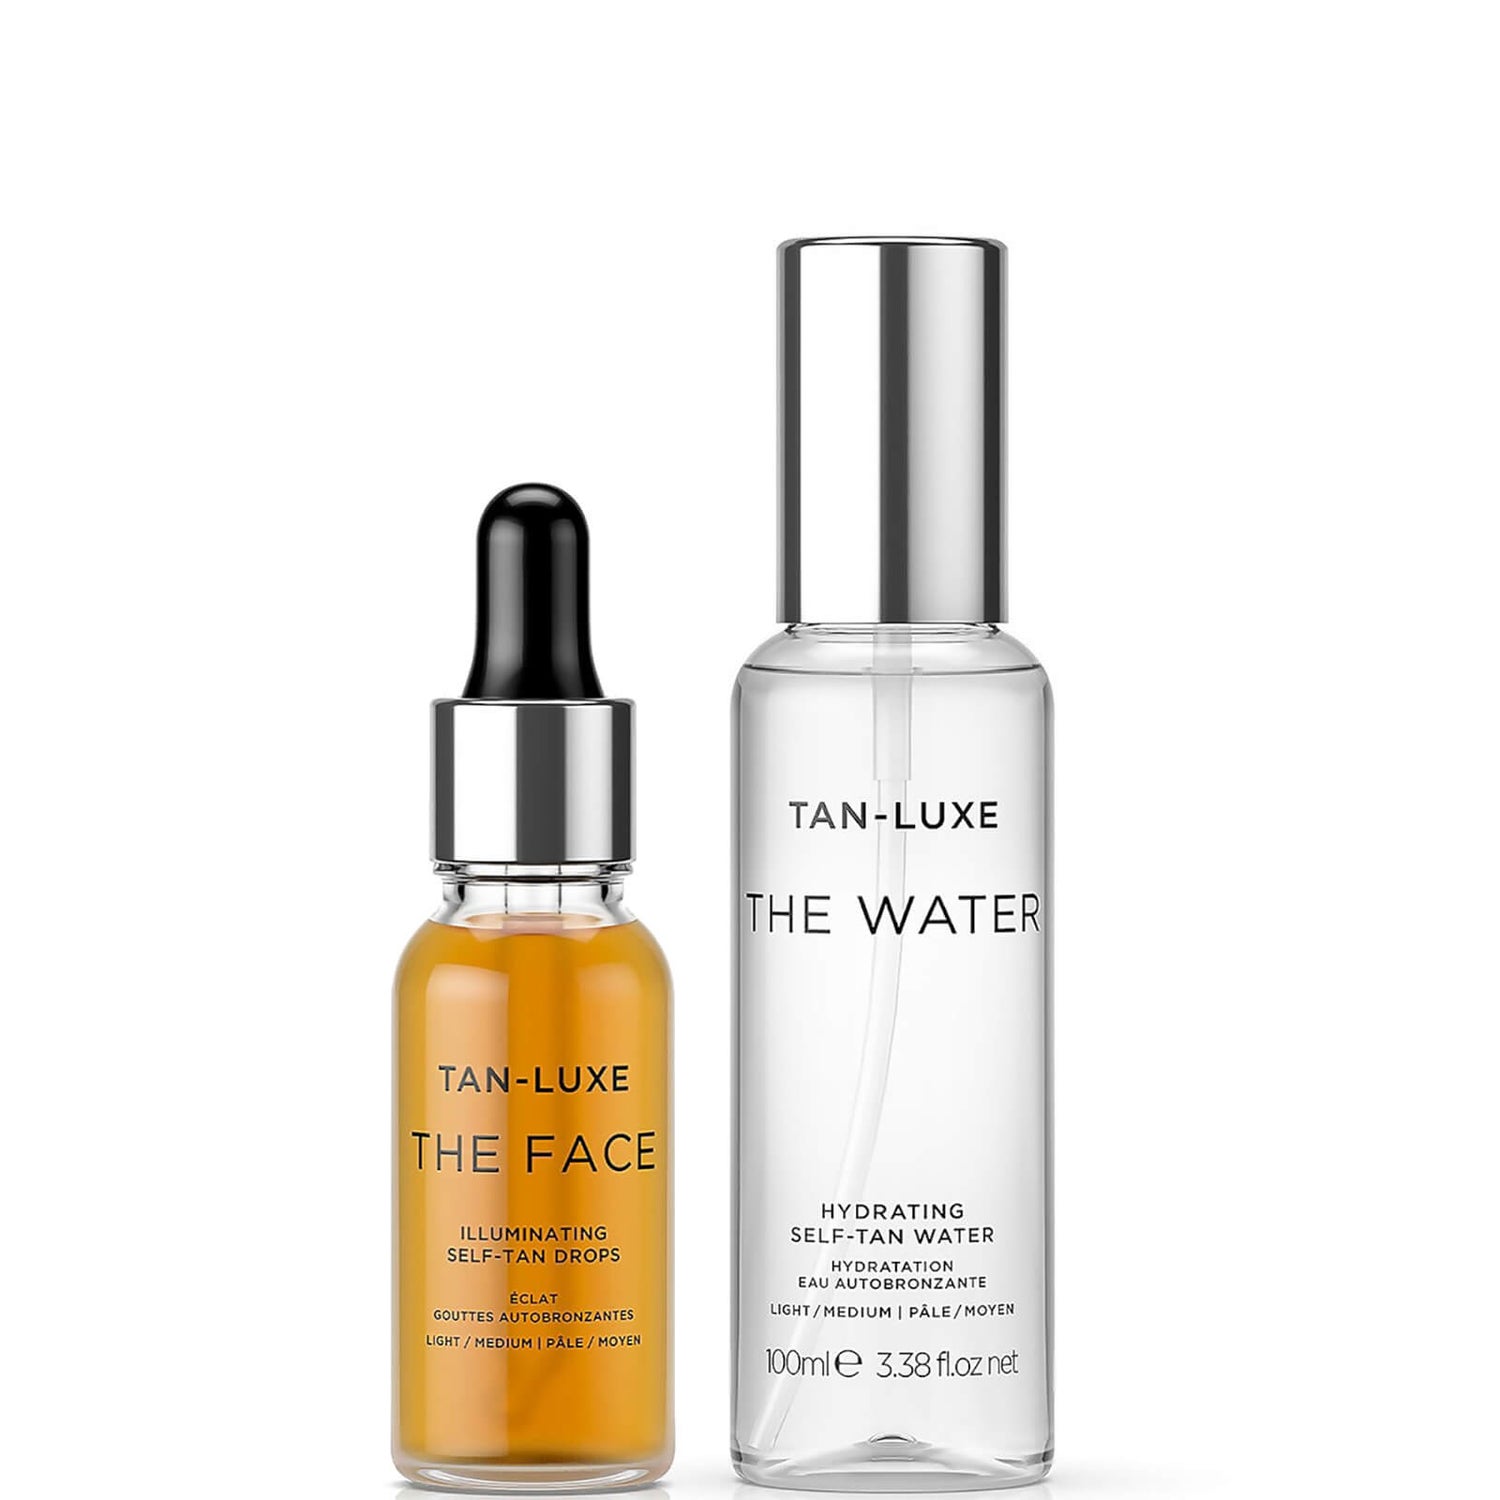 Tan-Luxe Face and Water Travel Large Bundle - Light-Medium (Worth £42.00)